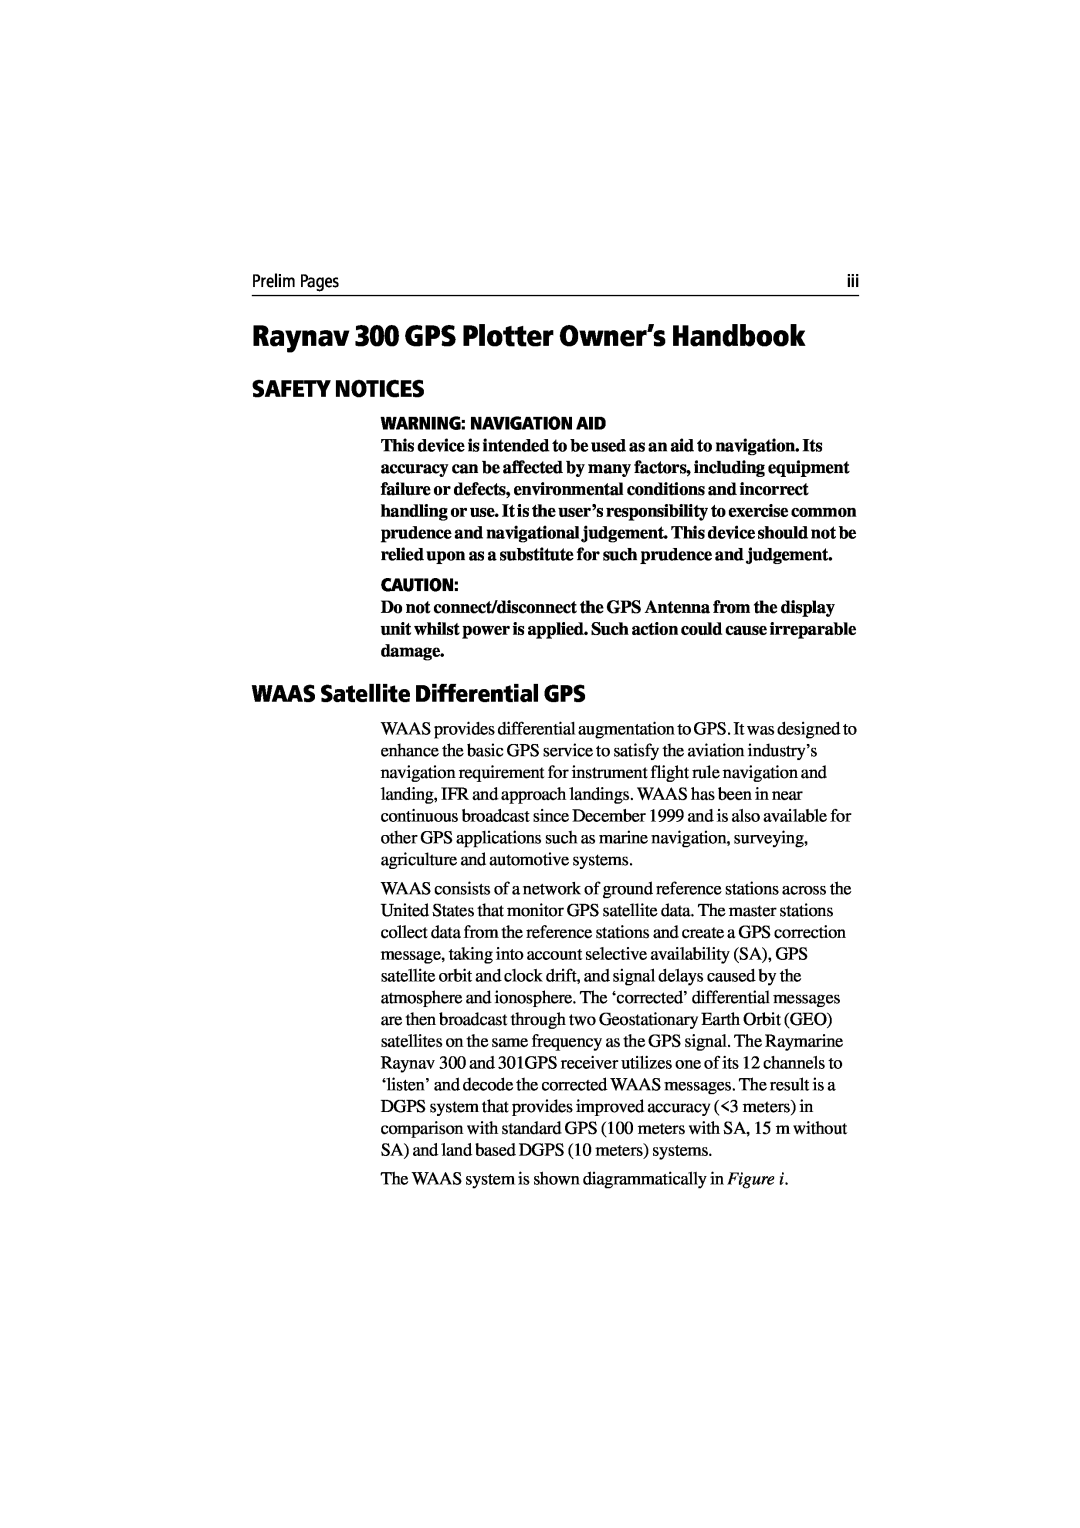 Raymarine manual Raynav 300 GPS Plotter Owner’s Handbook, Safety Notices, WAAS Satellite Differential GPS, Prelim Pages 